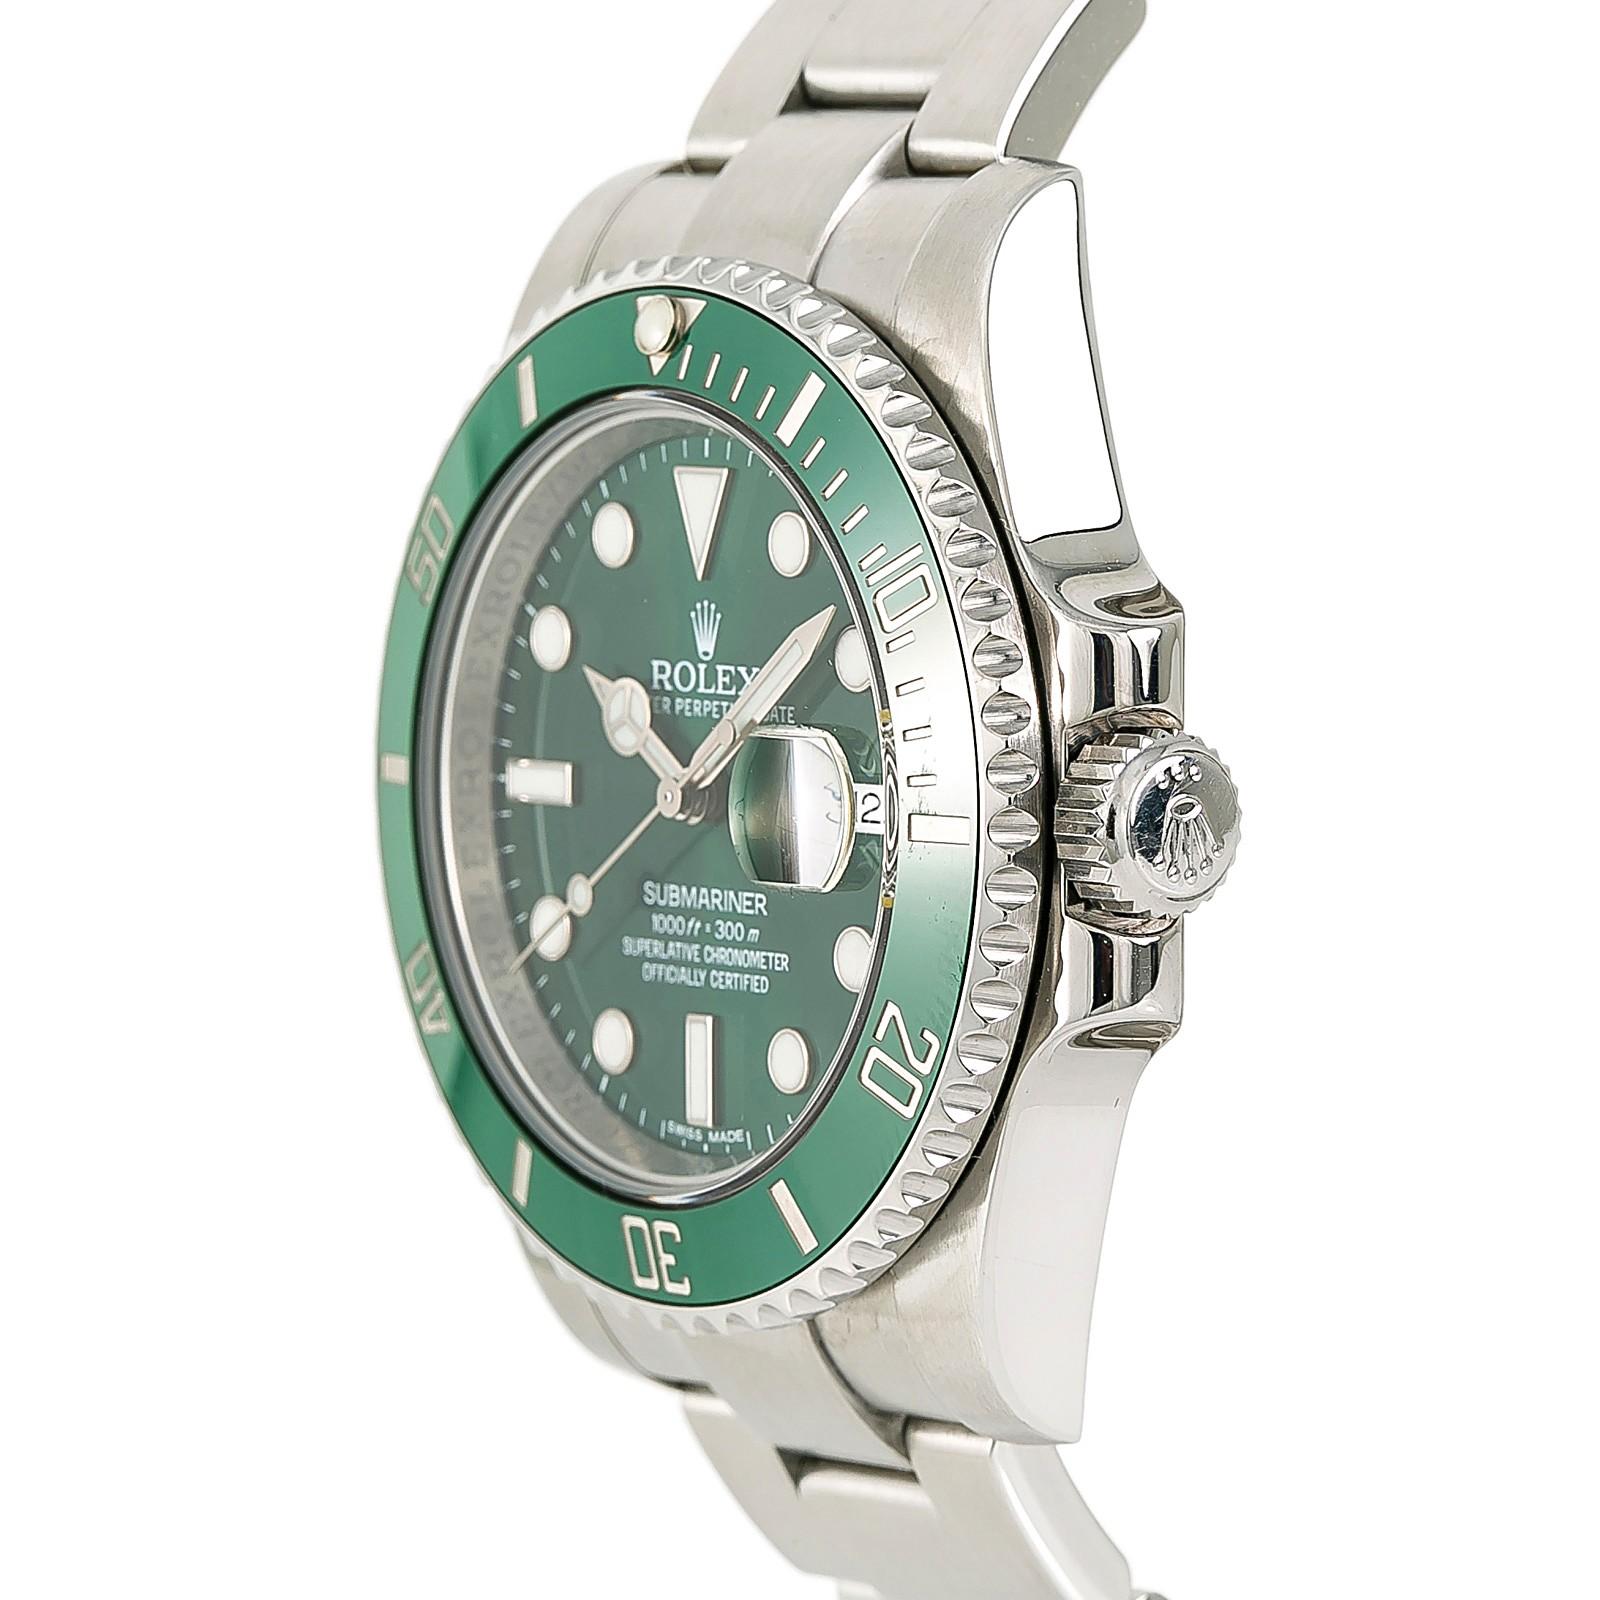 Certified Rolex Submariner Hulk 116610LV Men's Automatic Watch Stainless 1